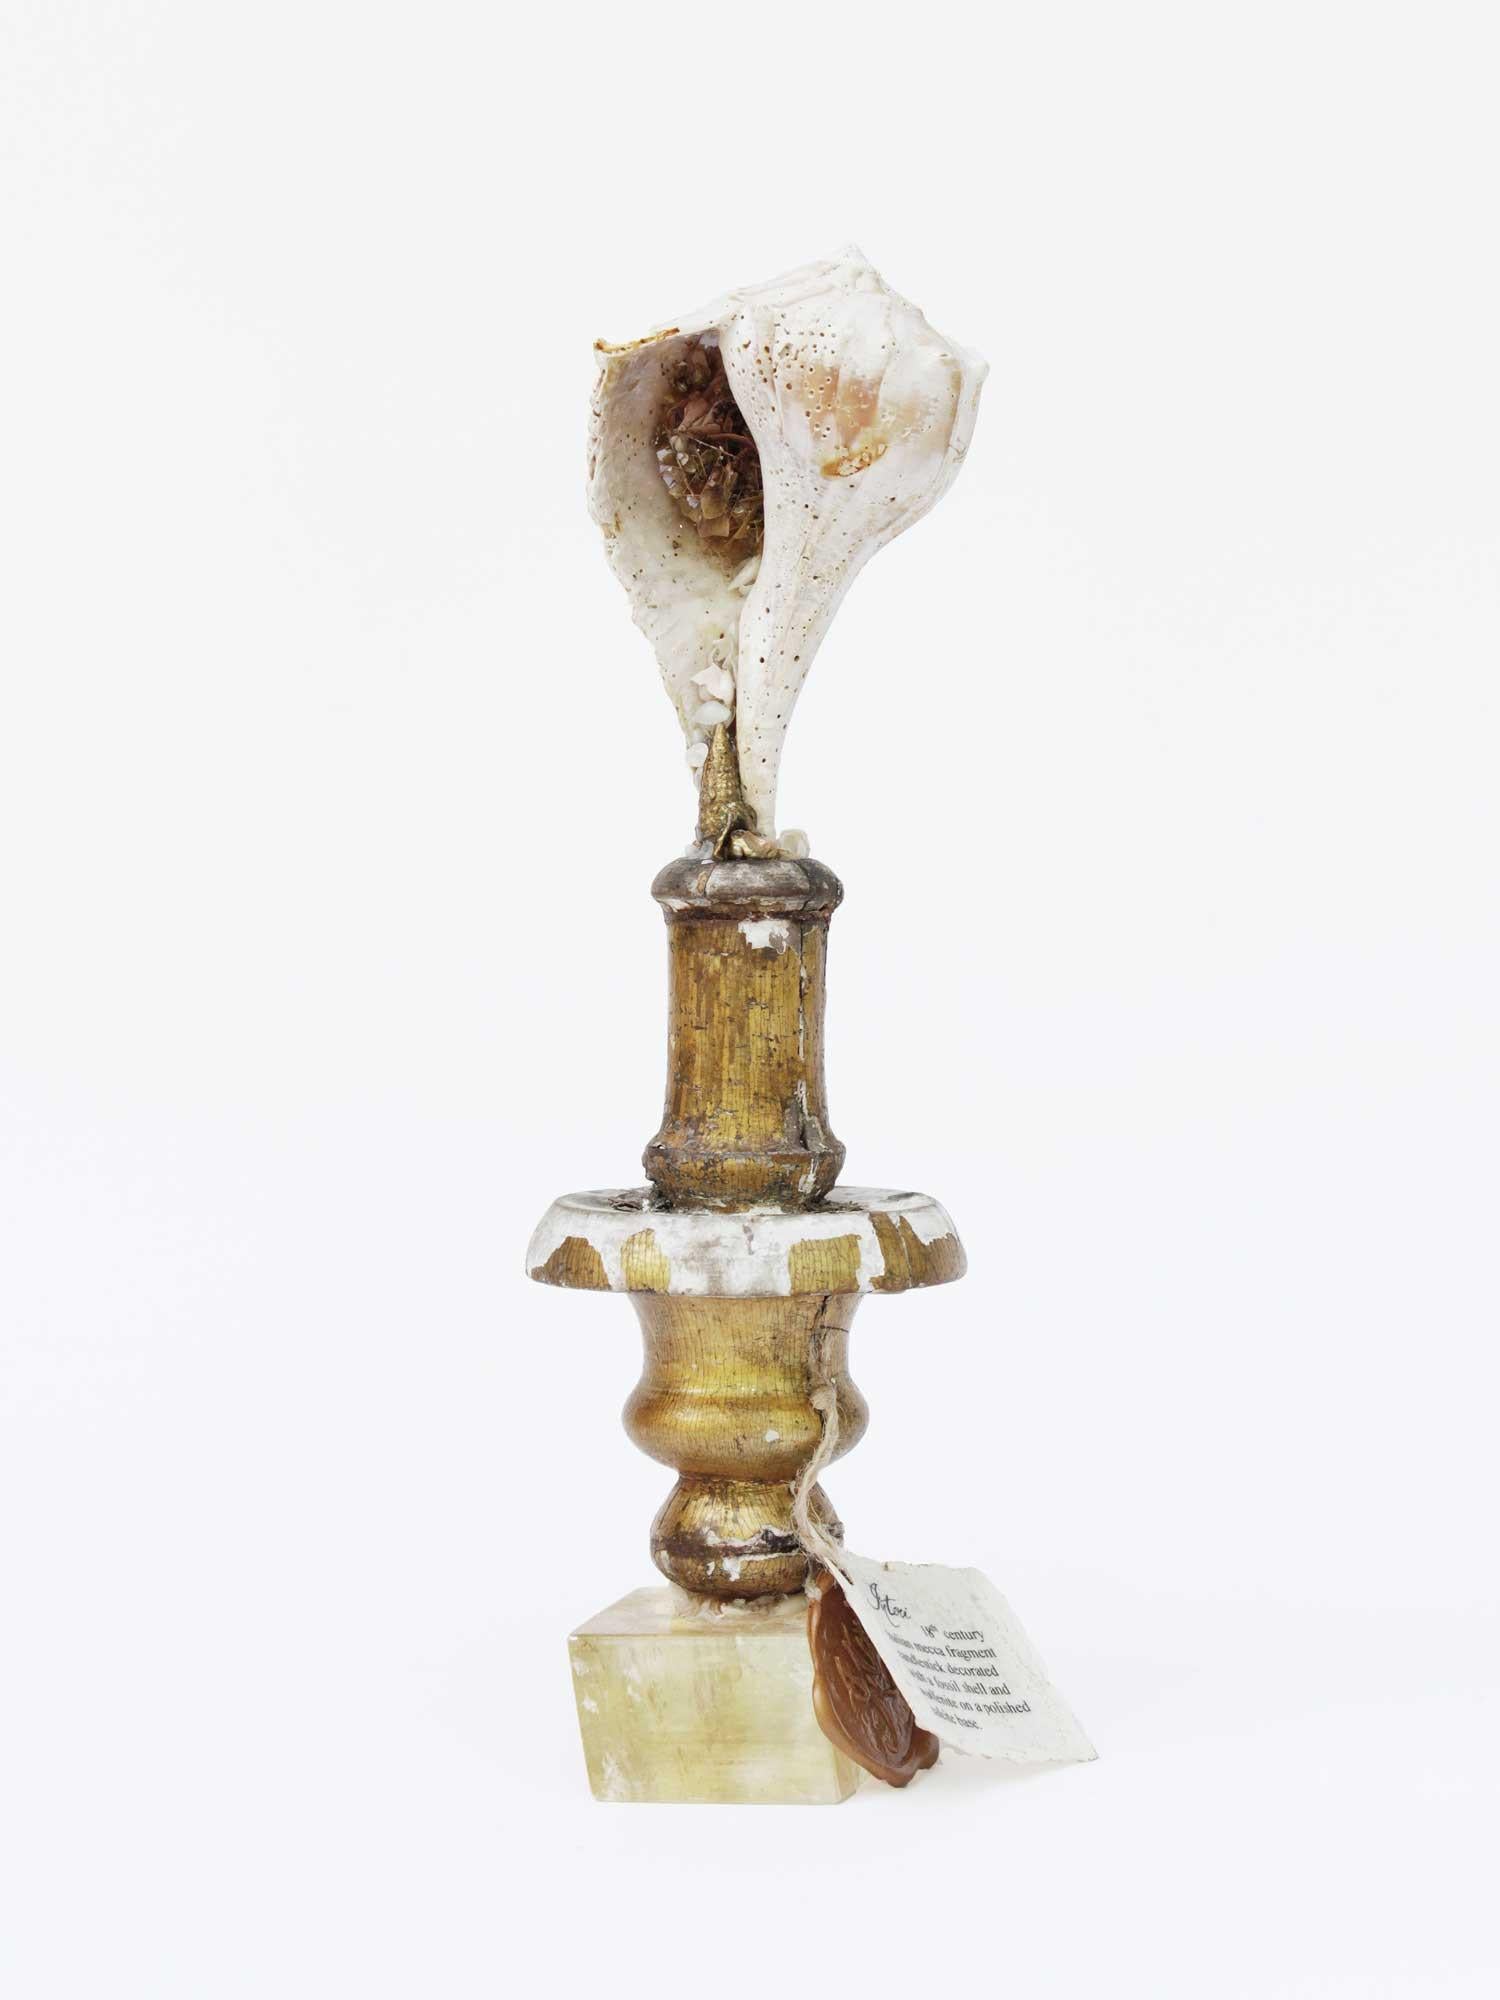 Sculptural 18th century Italian mecca fragment candlestick with a fossil shell and wulfenite on a polished calcite base.

The fragment was originally part of an 18th century Italian candlestick from a historic church. It is mounted with a fossil